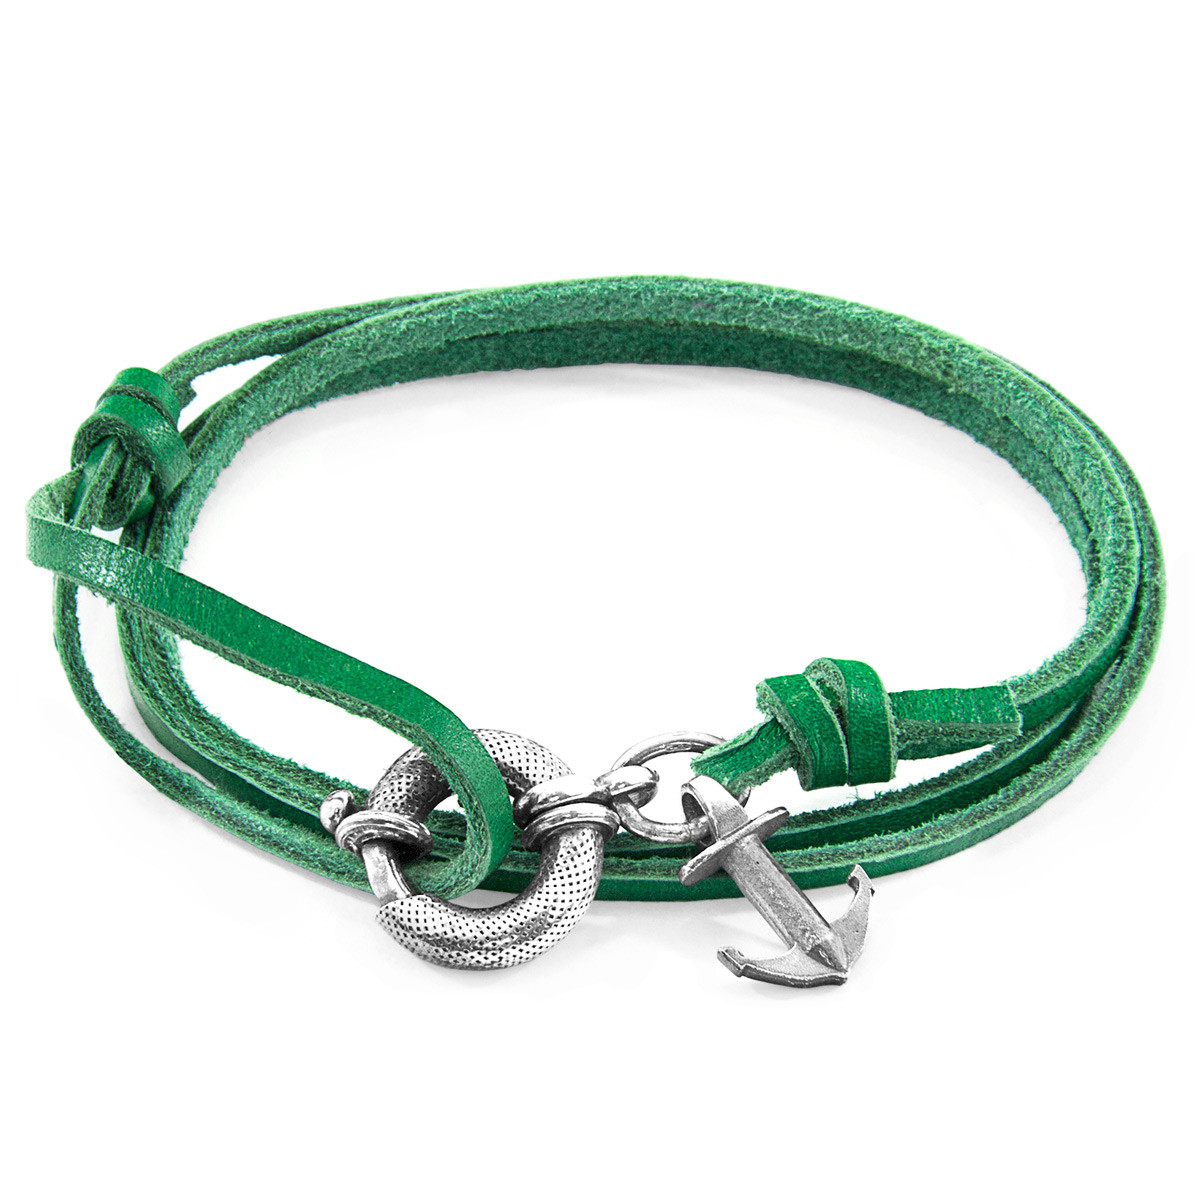 Anchor & Crew Fern Green Clyde Silver and Flat Leather Bracelet